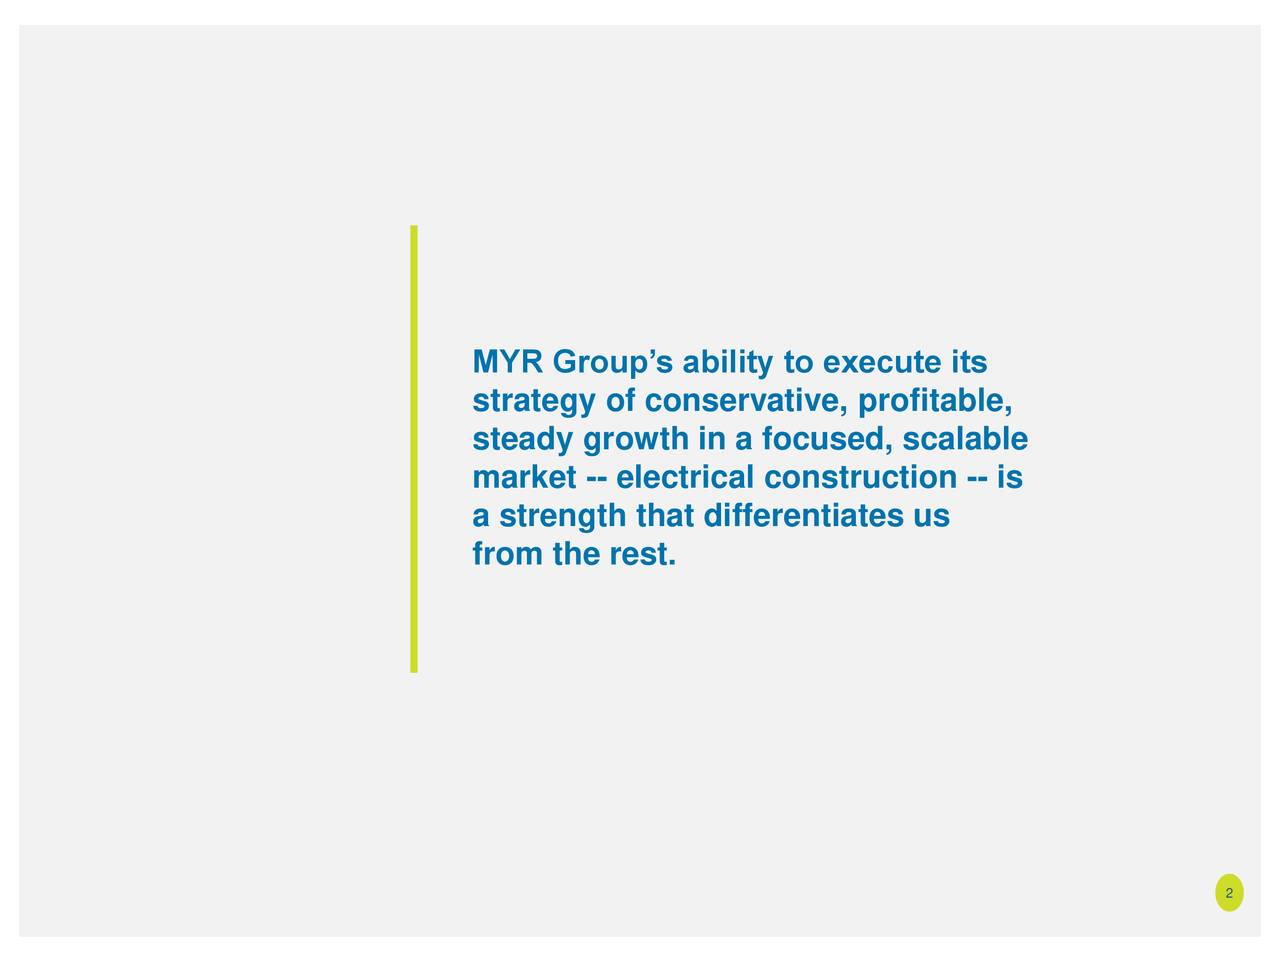 MYR Group’s ability to execute its